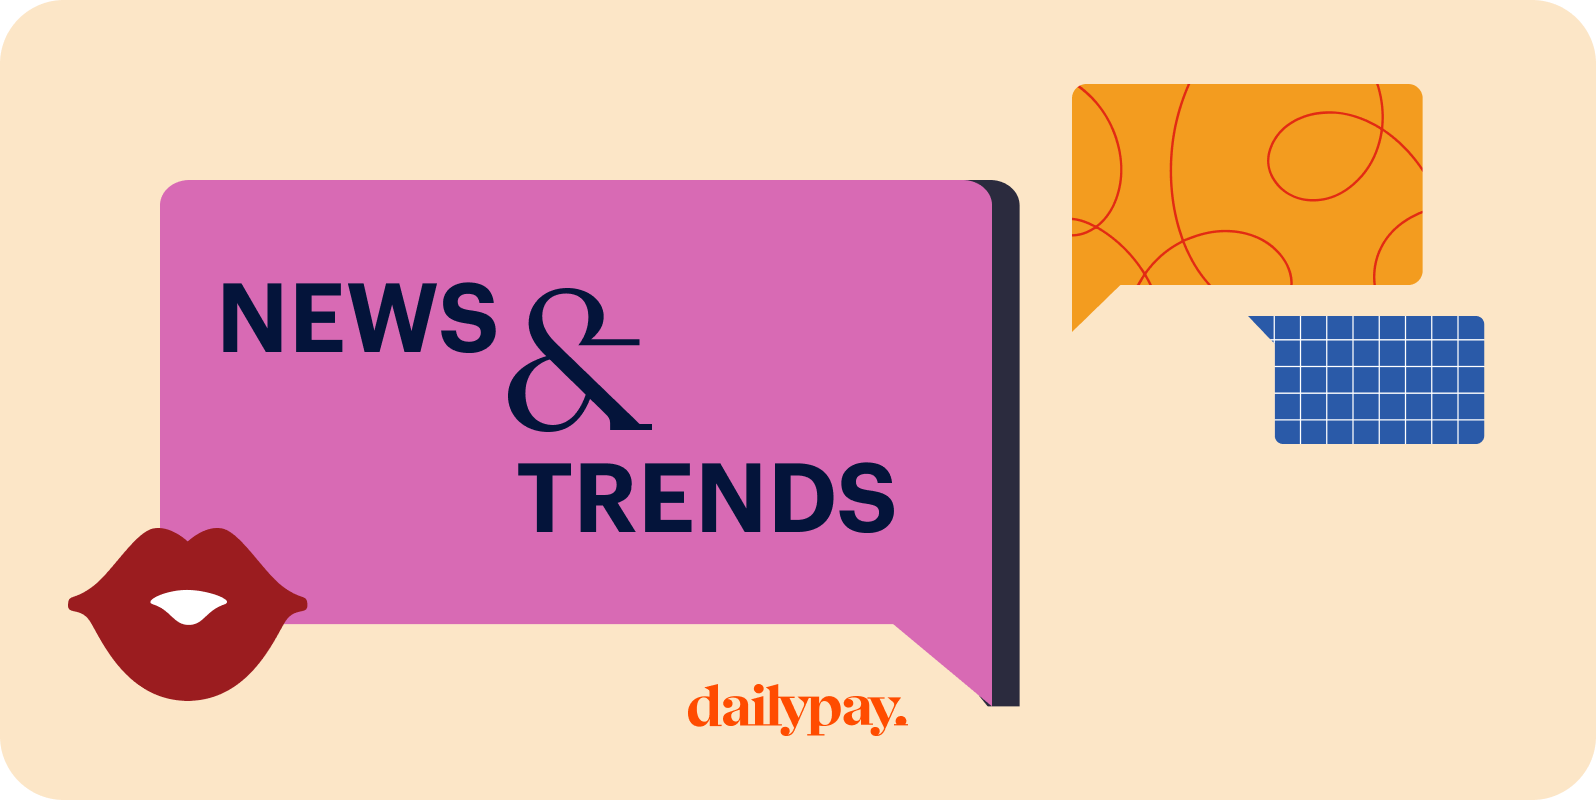 Illustration featuring a purple speech bubble with the text "NEWS & TRENDS" alongside colorful abstract shapes and the DailyPay logo at the bottom.